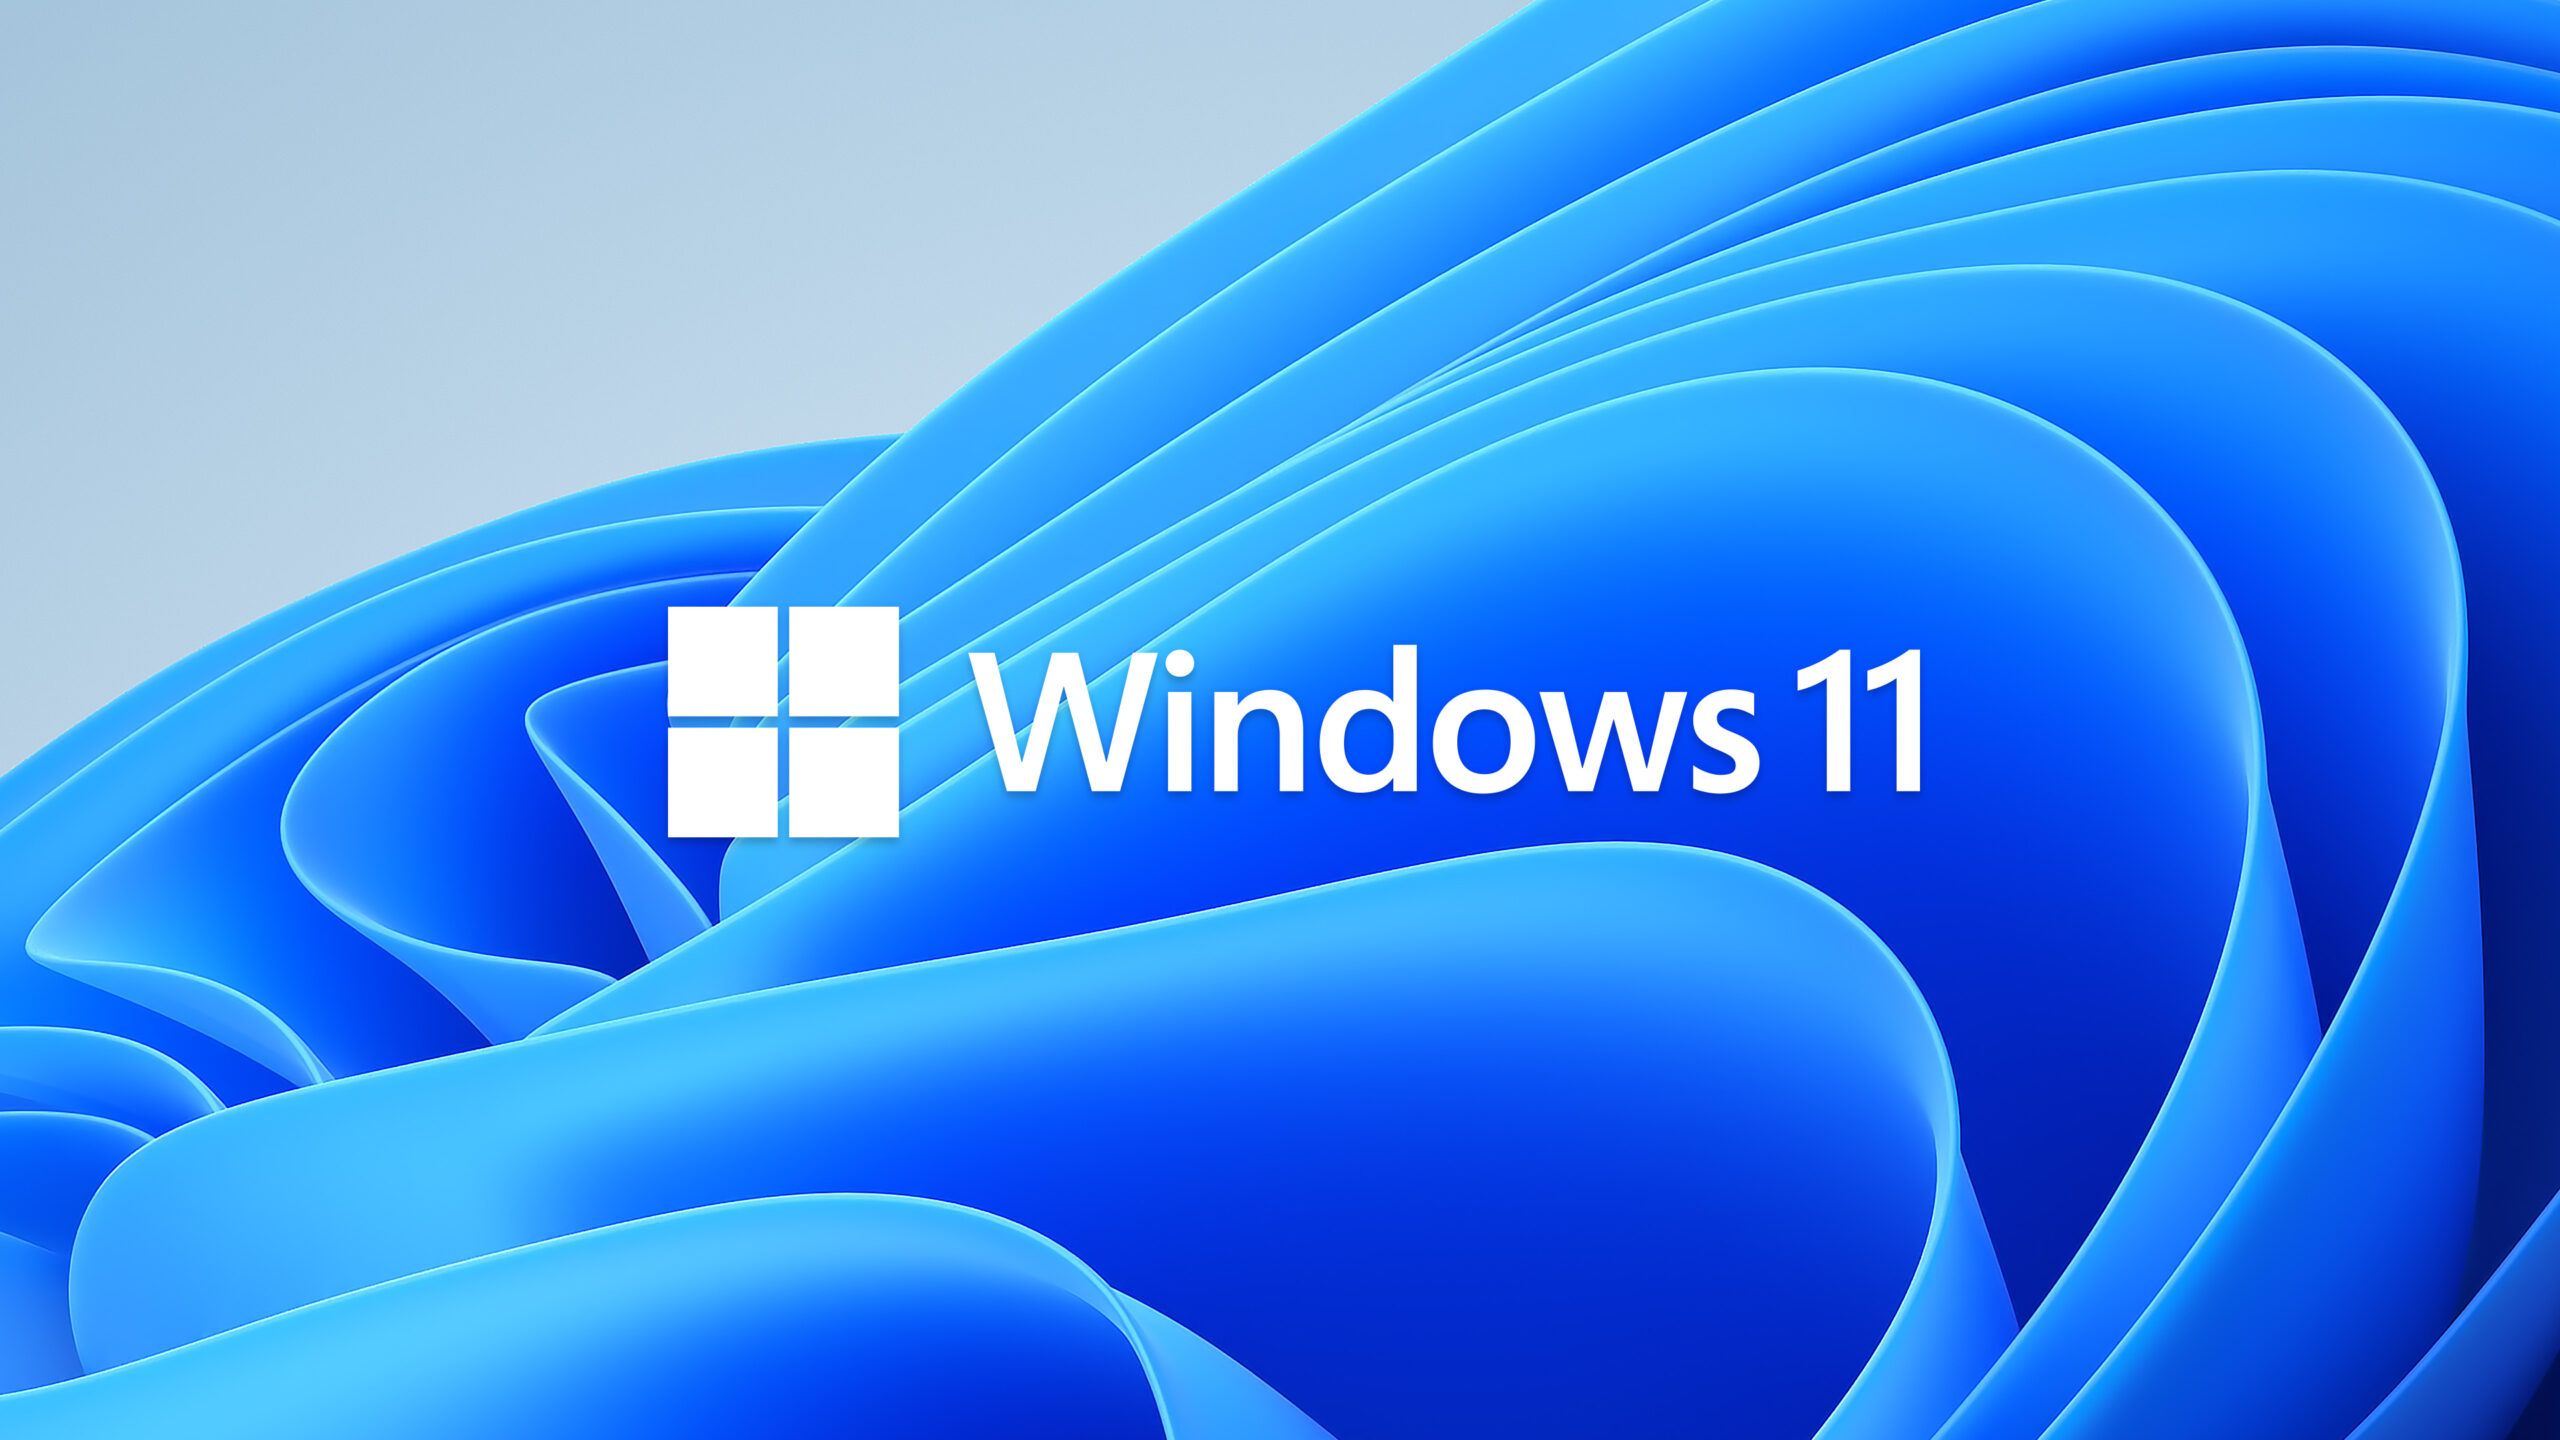 Windows 11 now available for more users